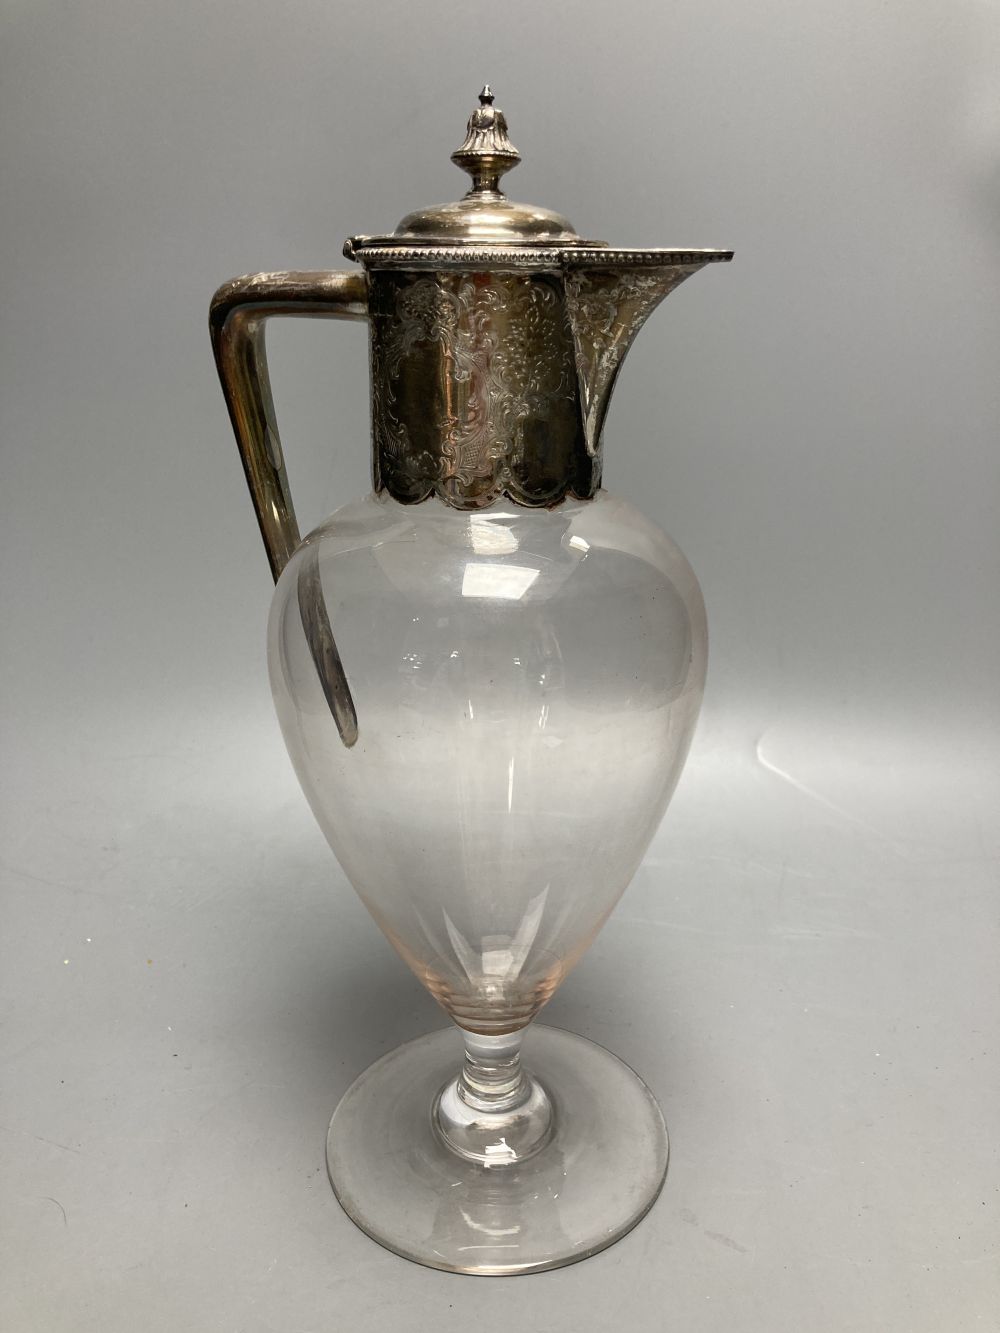 An Edwardian engraved silver mounted inverted pear shaped pedestal glass claret jug, Atkin Brothers, Sheffield, 1906?, 28.8cm.